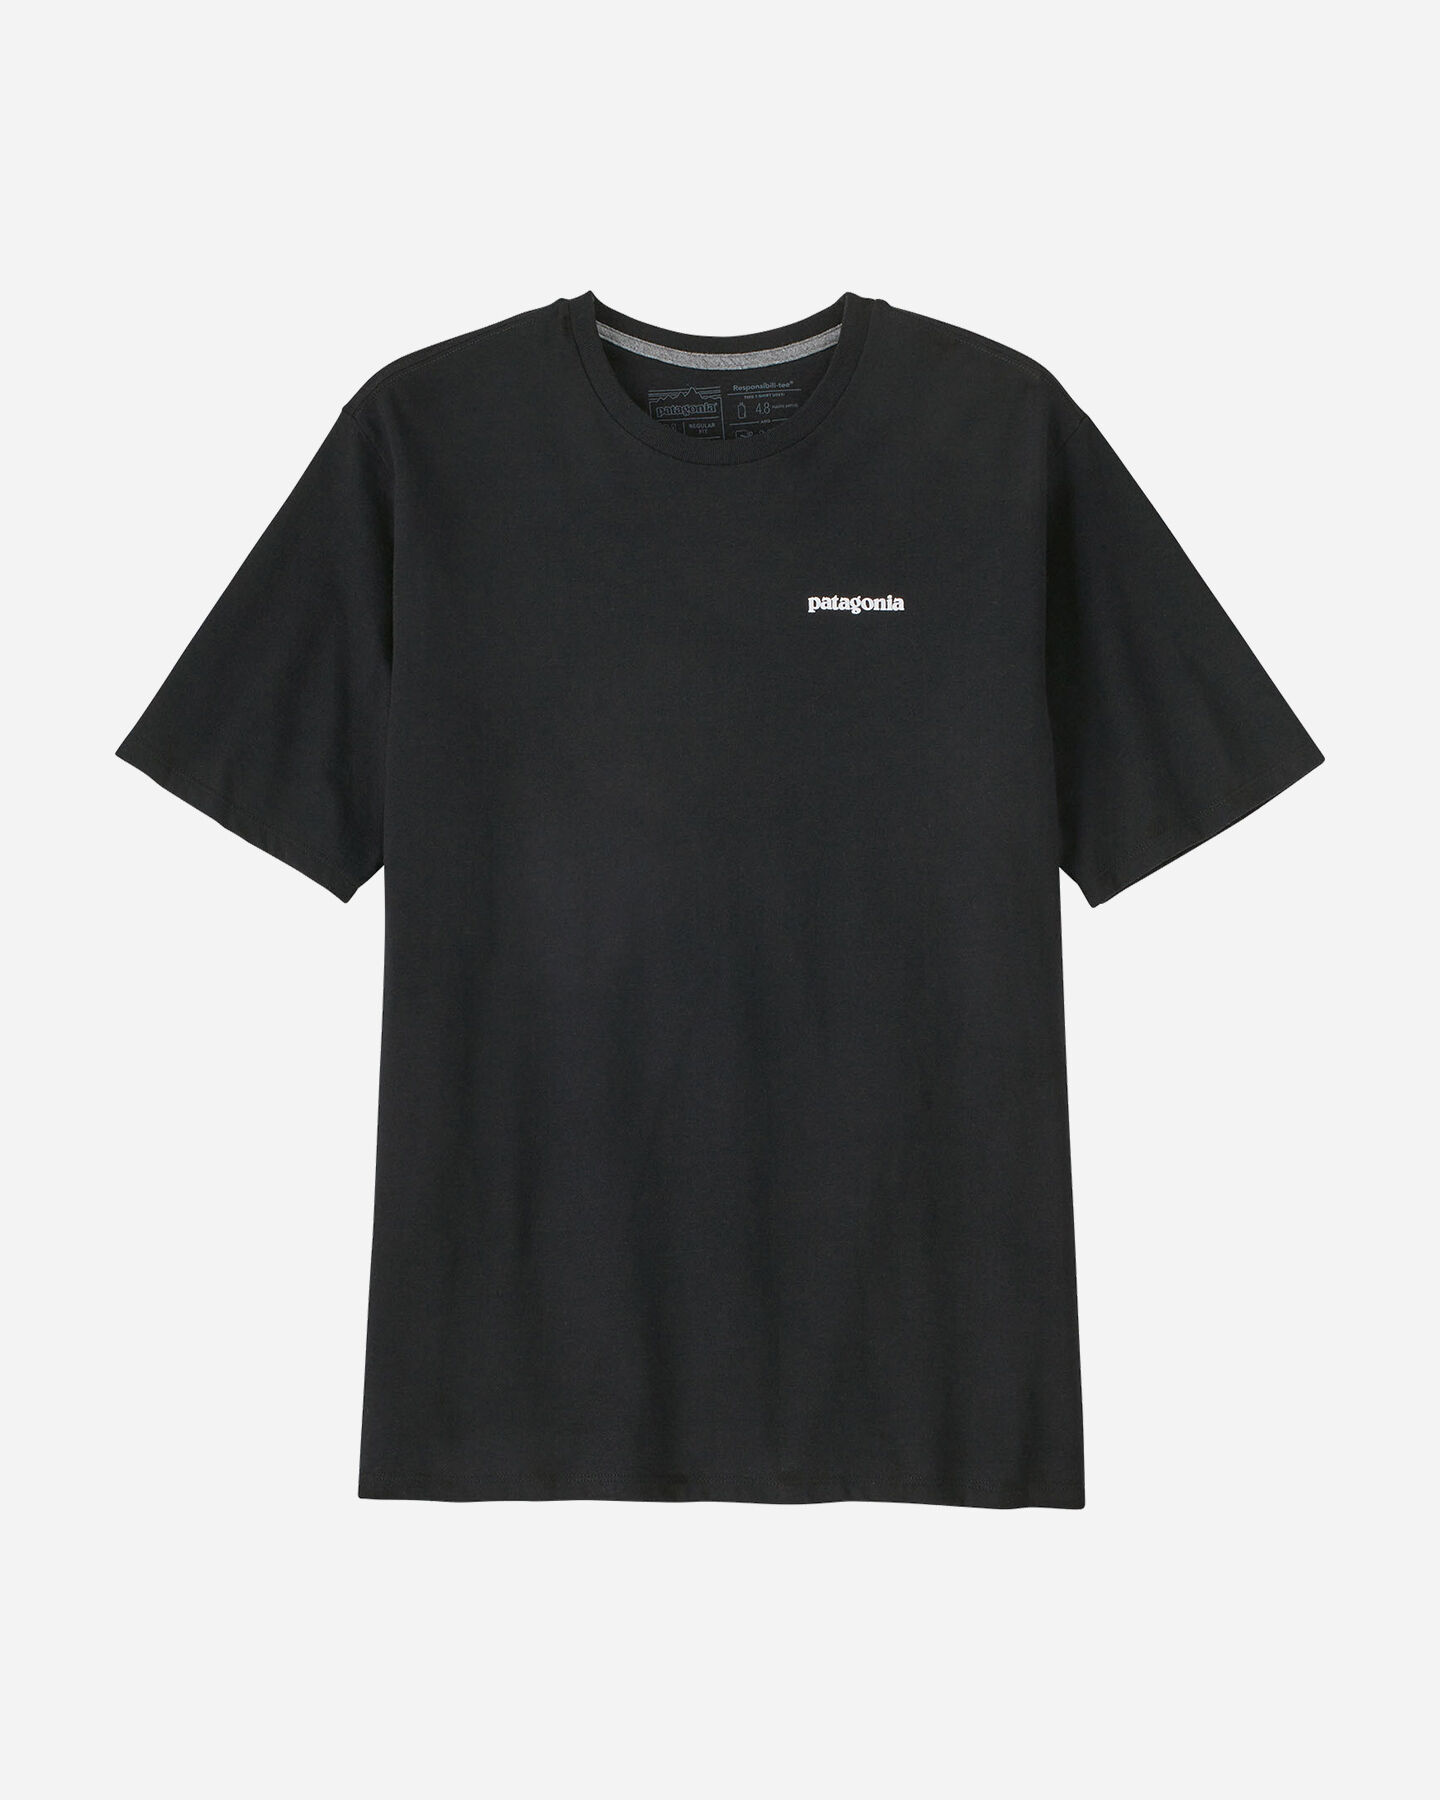  T-Shirt PATAGONIA BIG LOGO M S5443941|BLK|S scatto 0